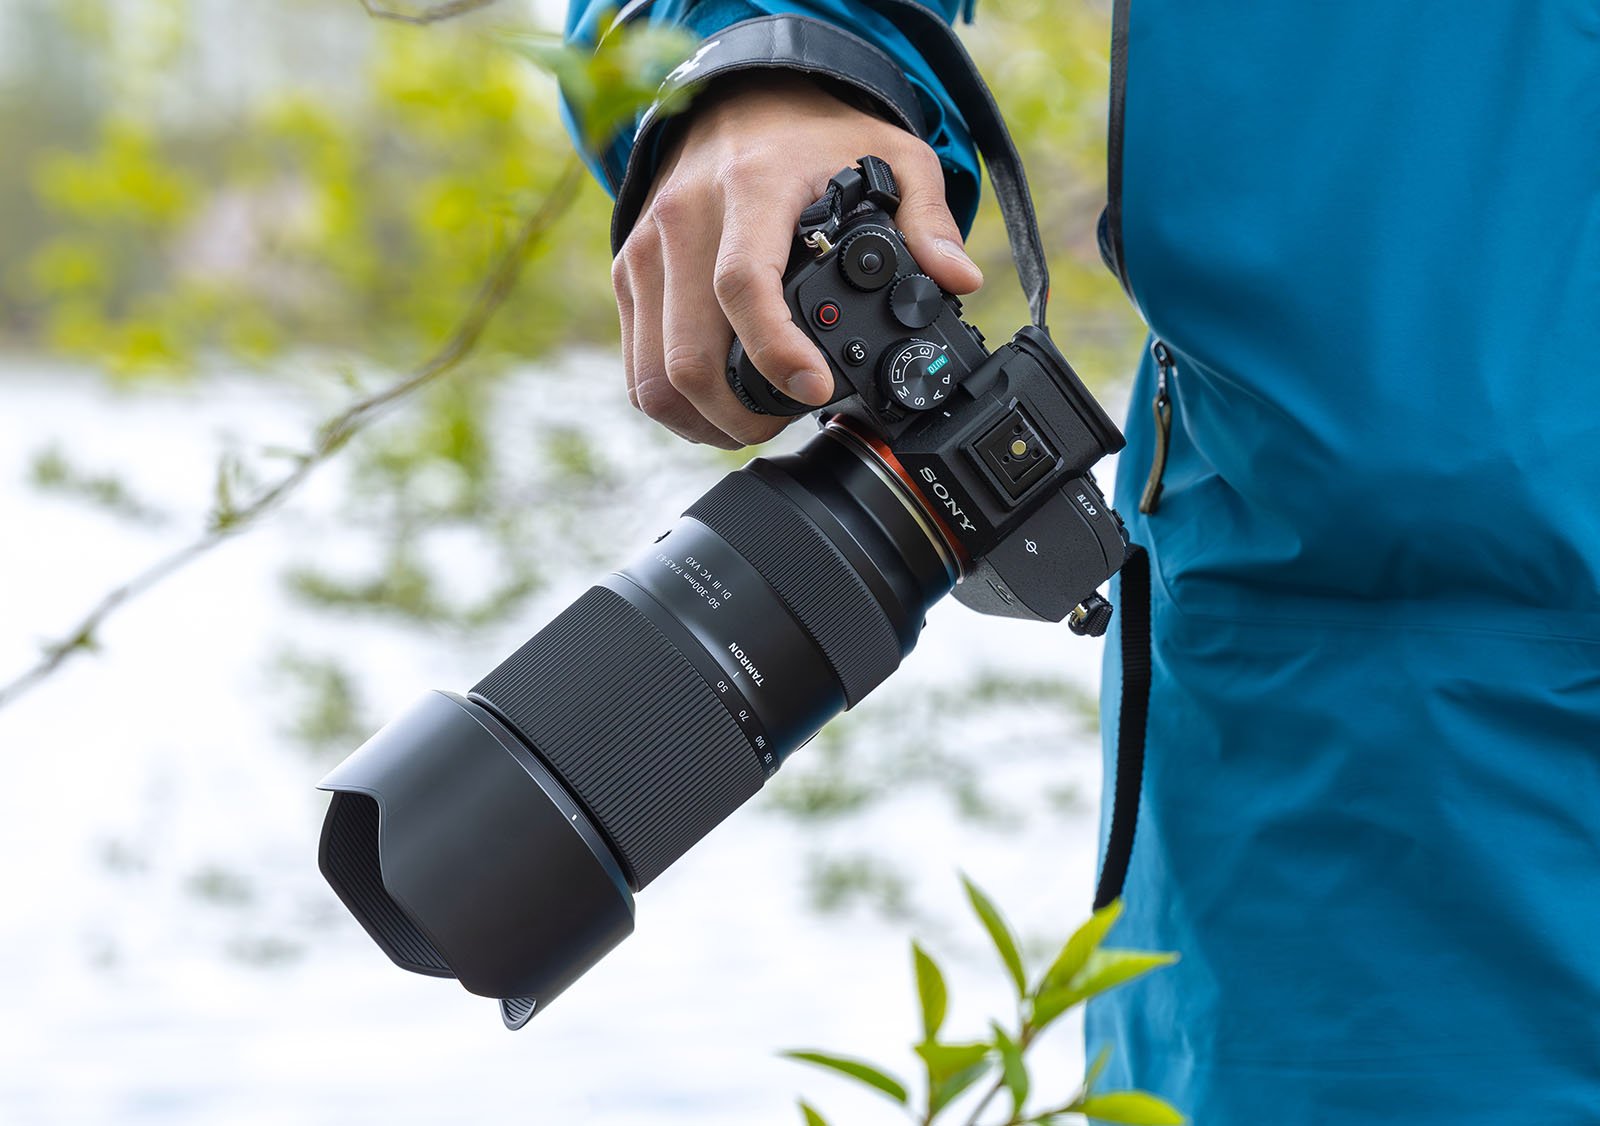 A person in a blue jacket holds a Sony camera with a large telephoto lens attached. The background features blurred greenery and water, indicating an outdoor setting, likely near a lake or river.